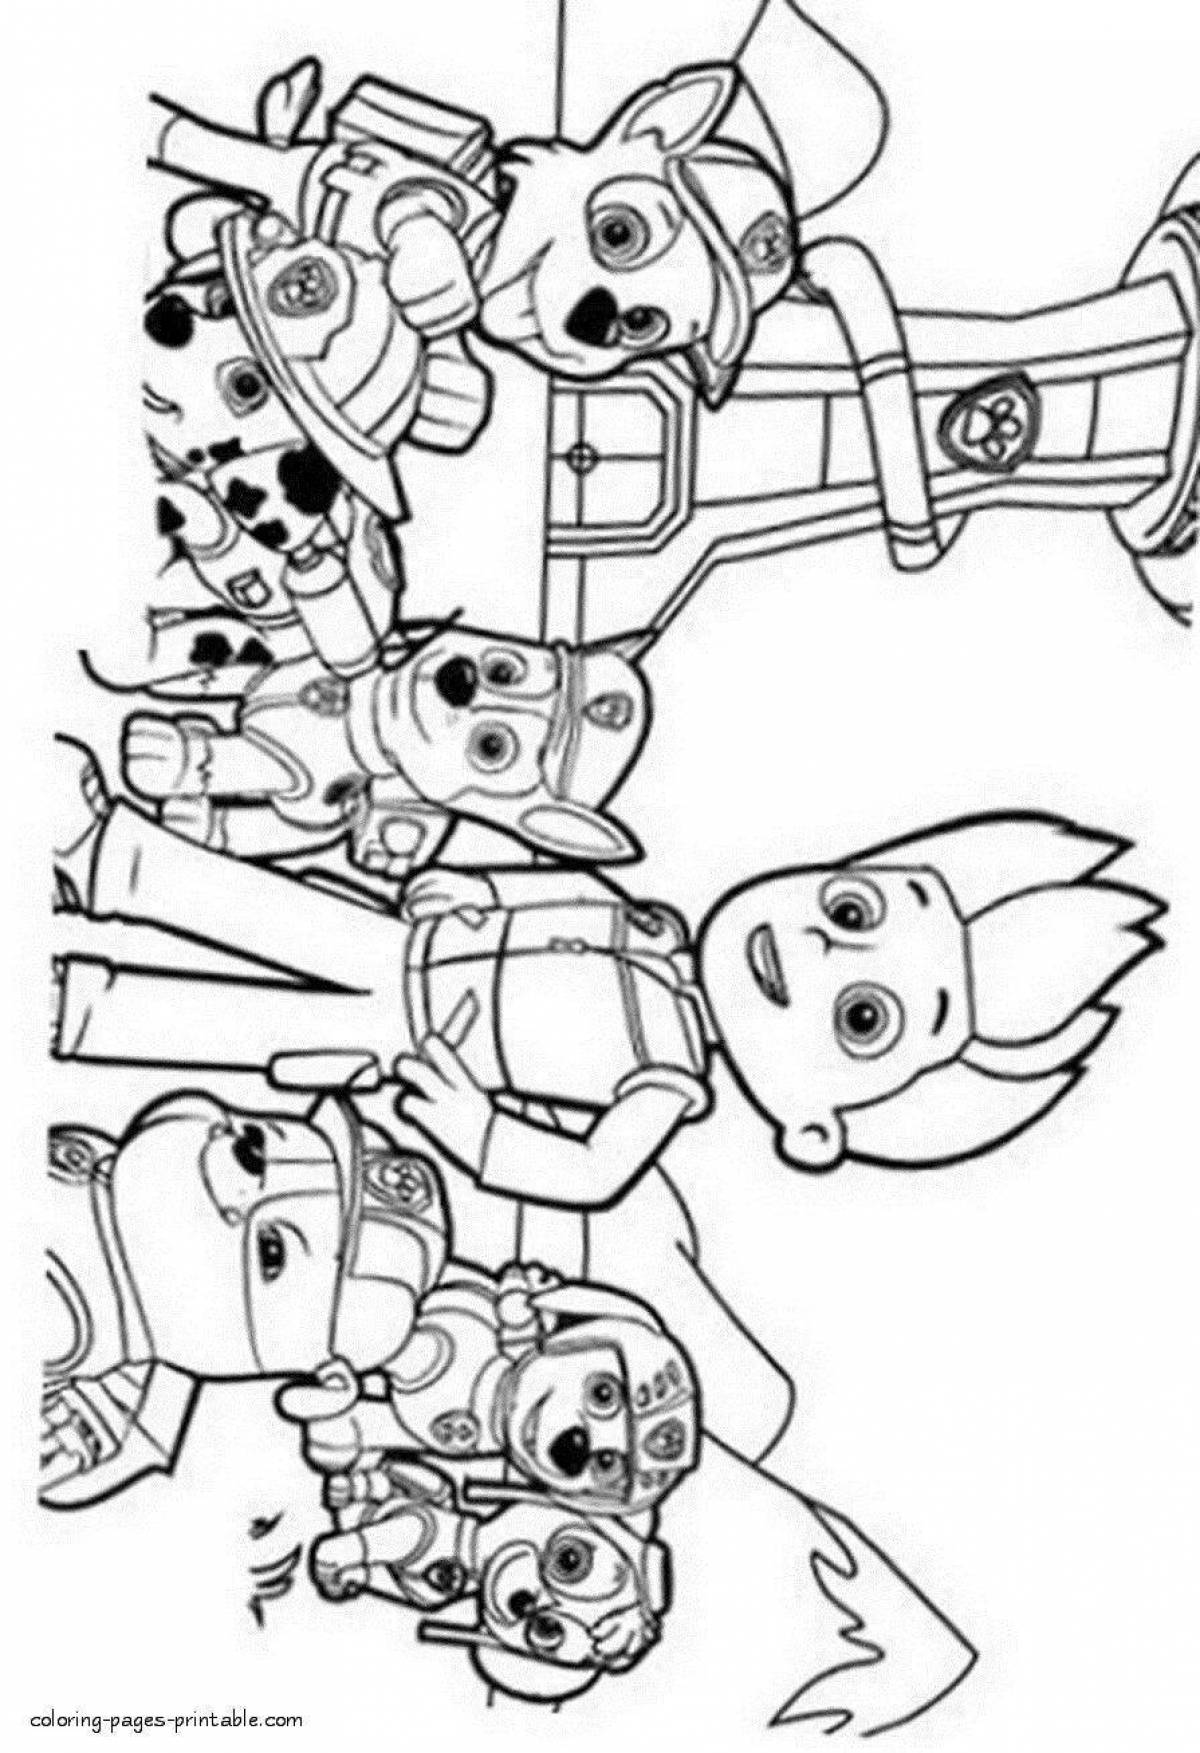 A fascinating coloring page for the Paw Patrol base